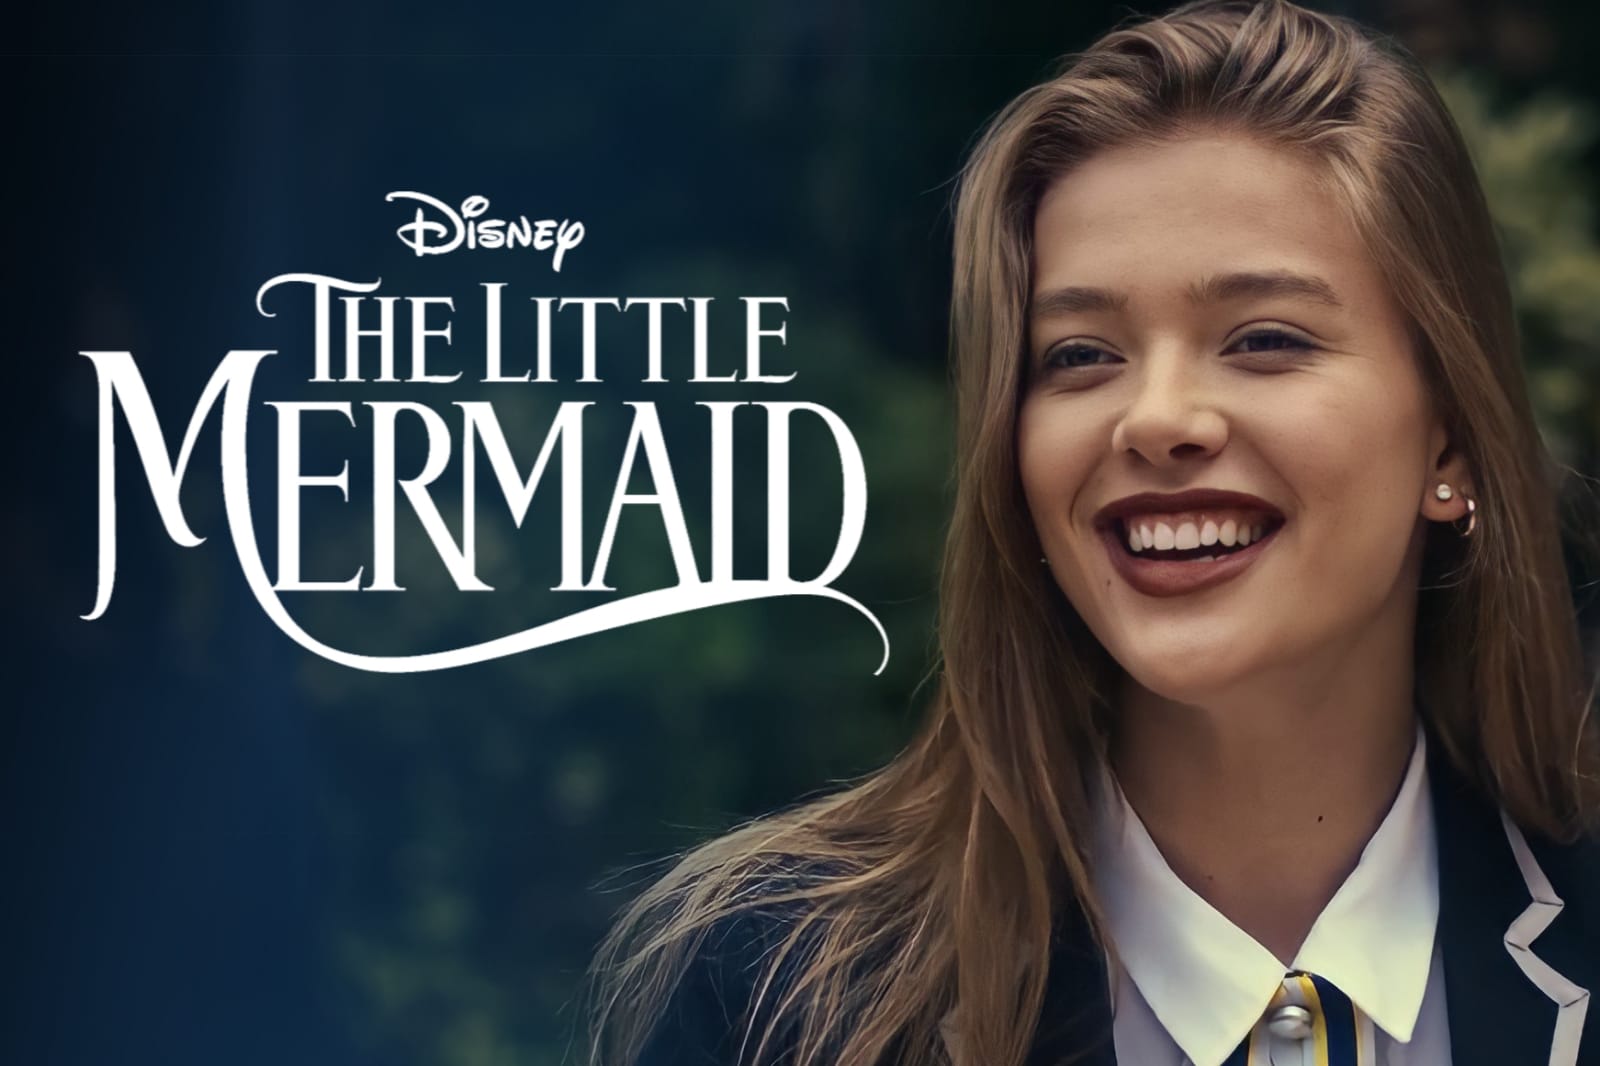 Jessica Alexander Discusses Her Experience Filming ‘The Little Mermaid’